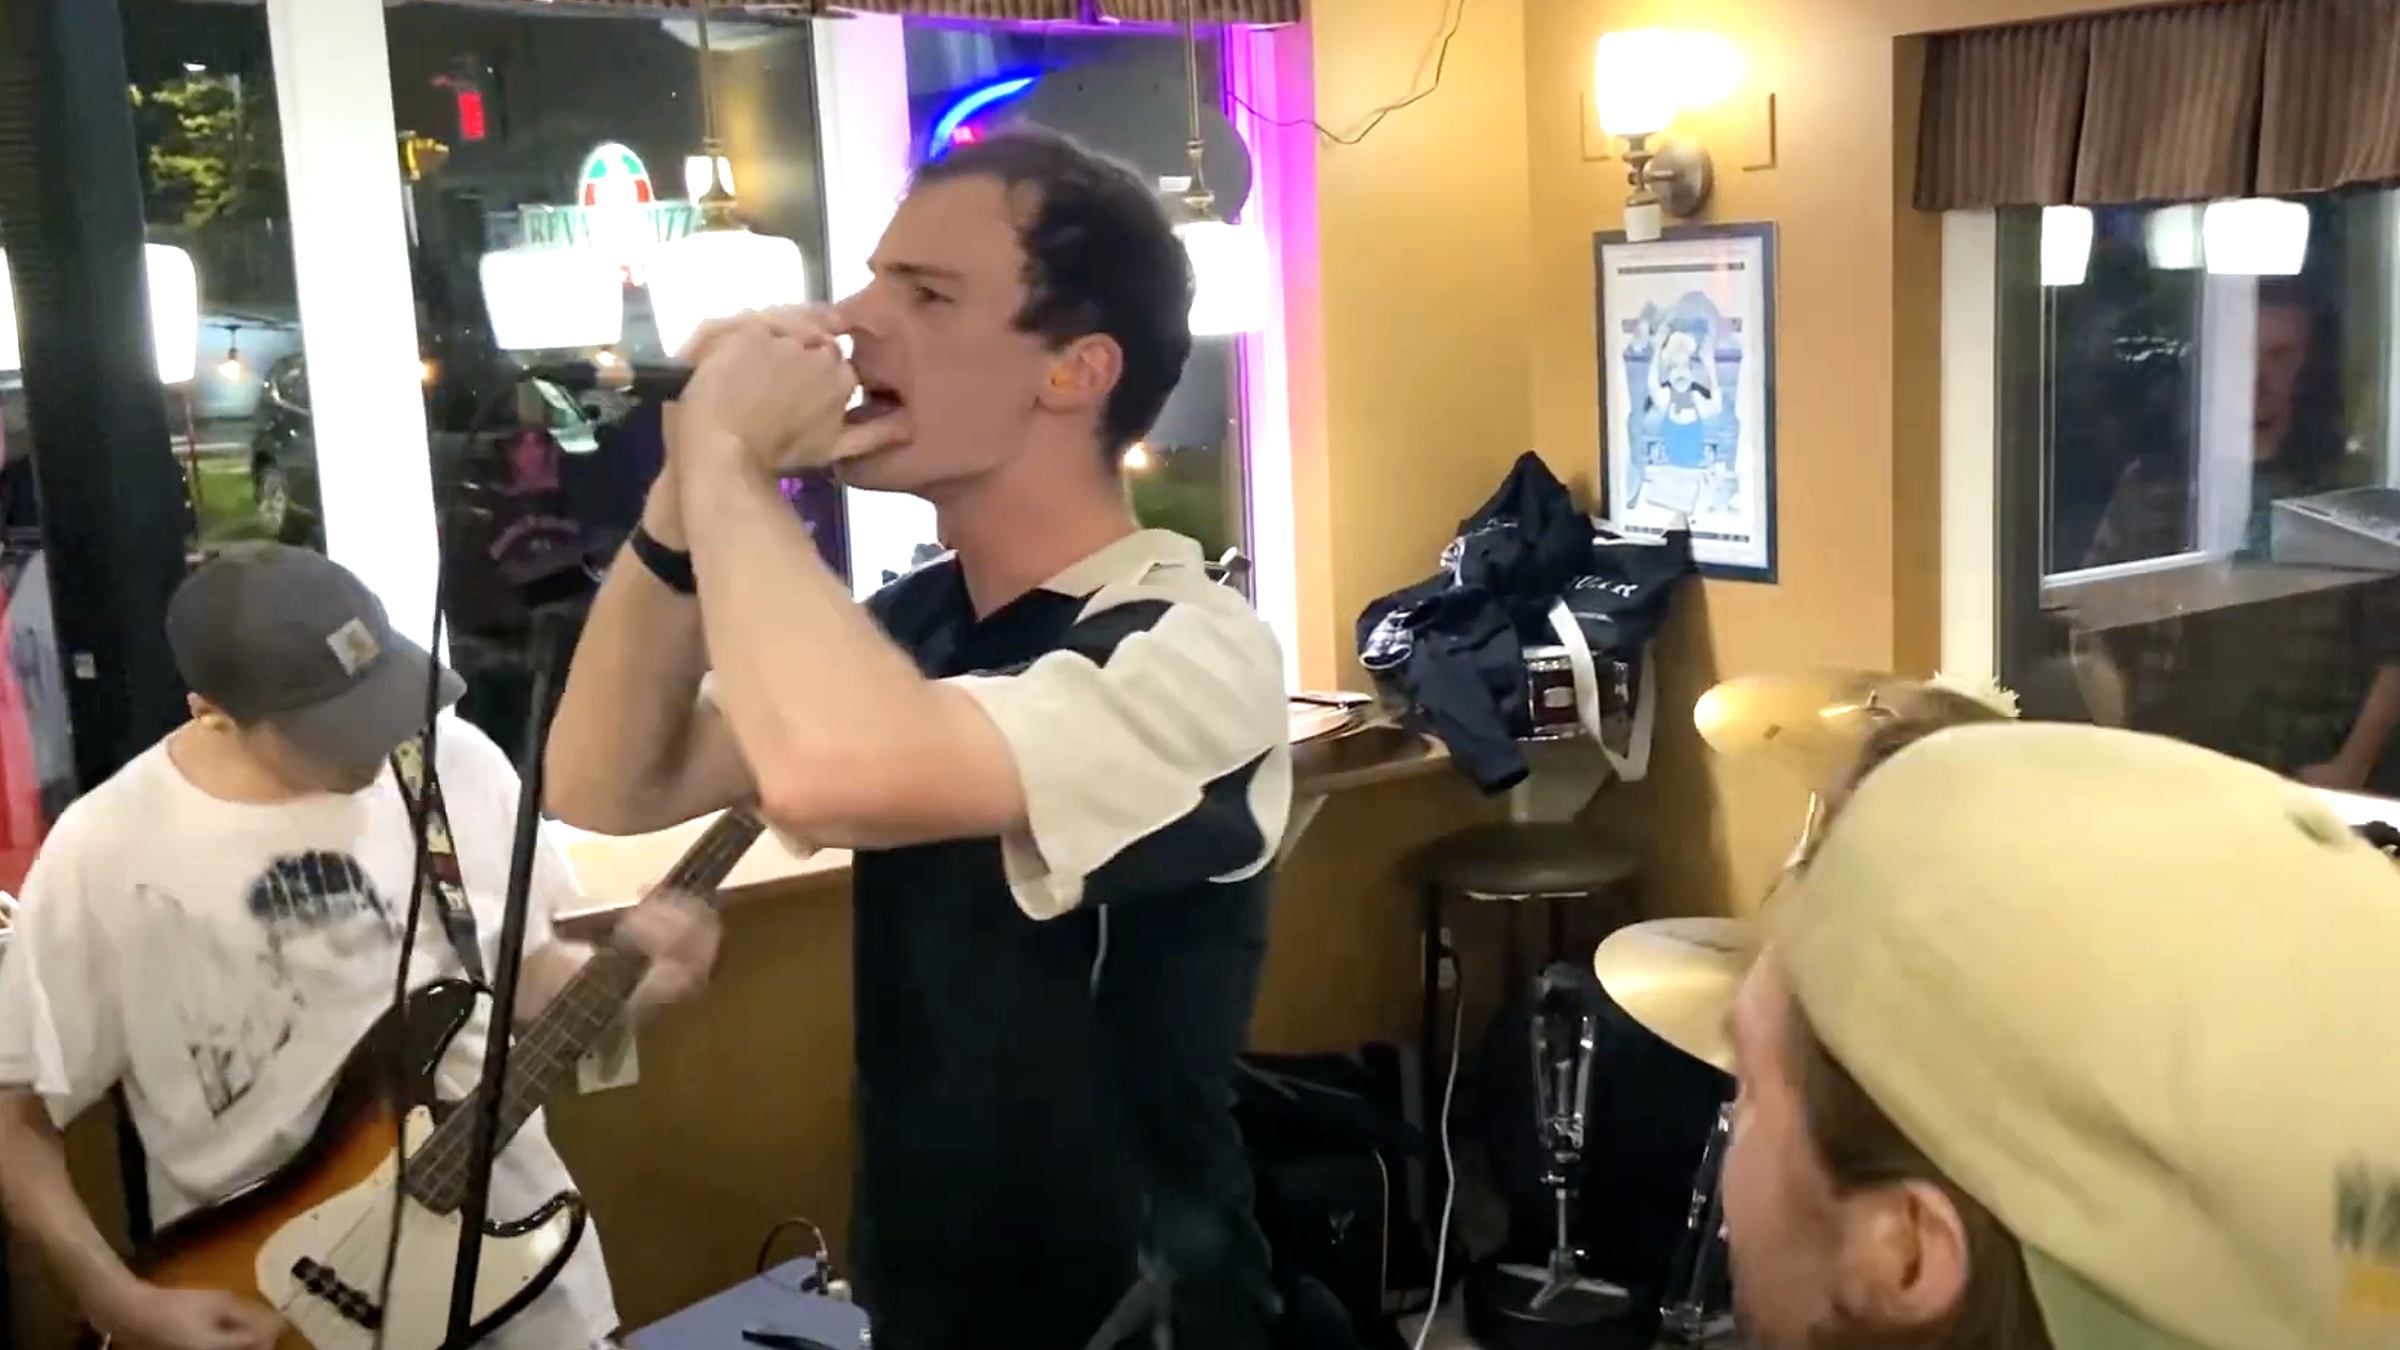 A band performs inside a pizza restaurant.